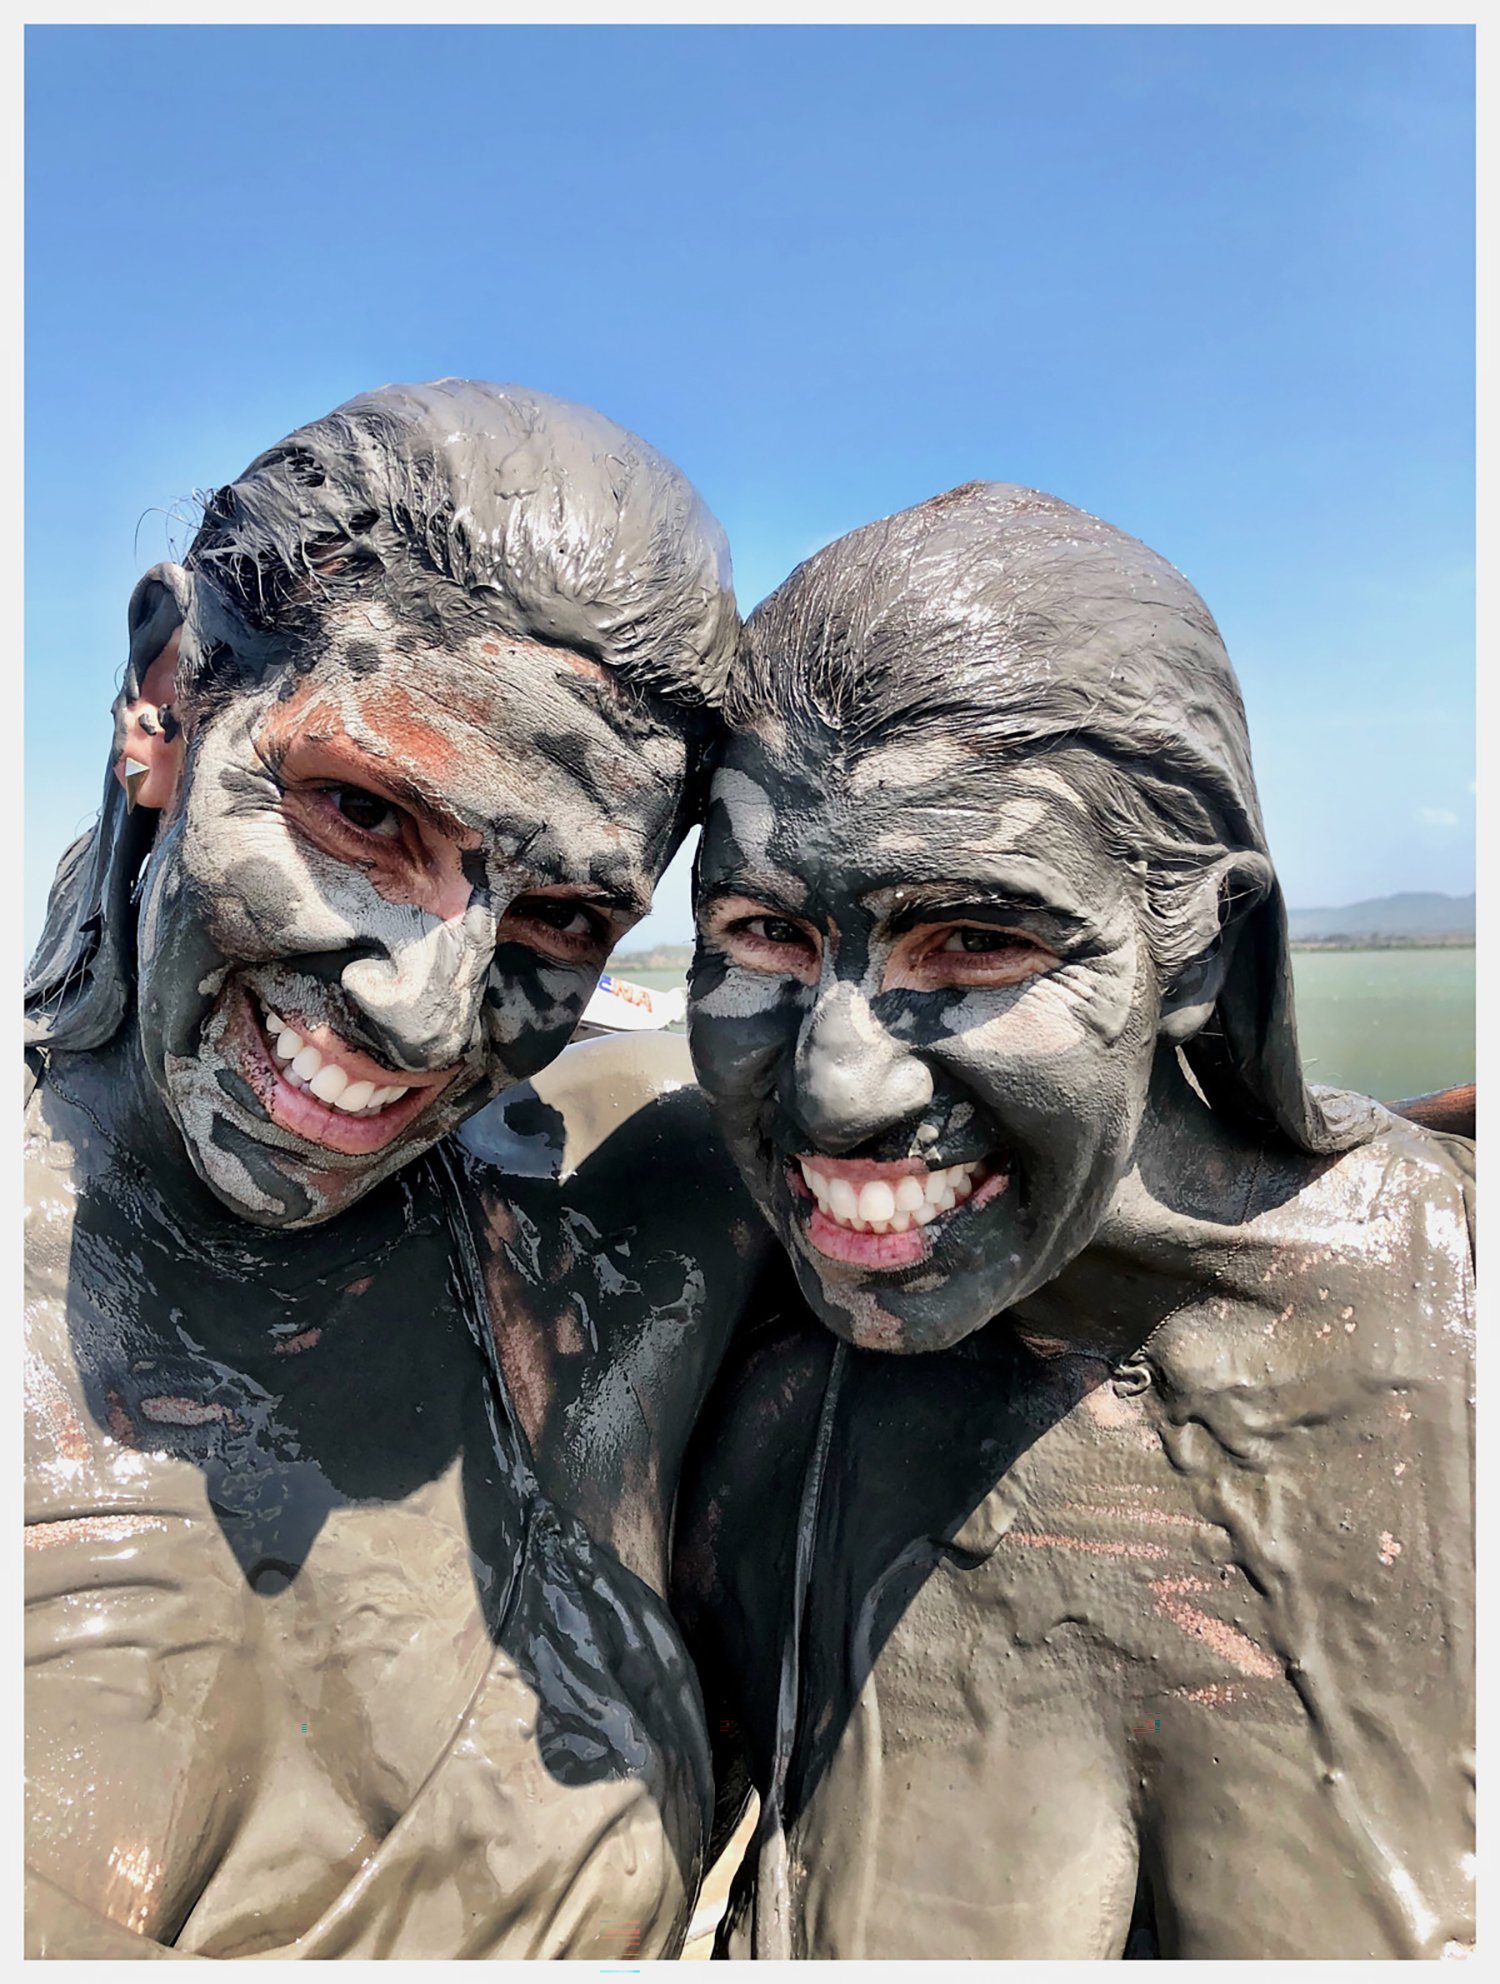 two women covered in mud posing for a photo and smiling